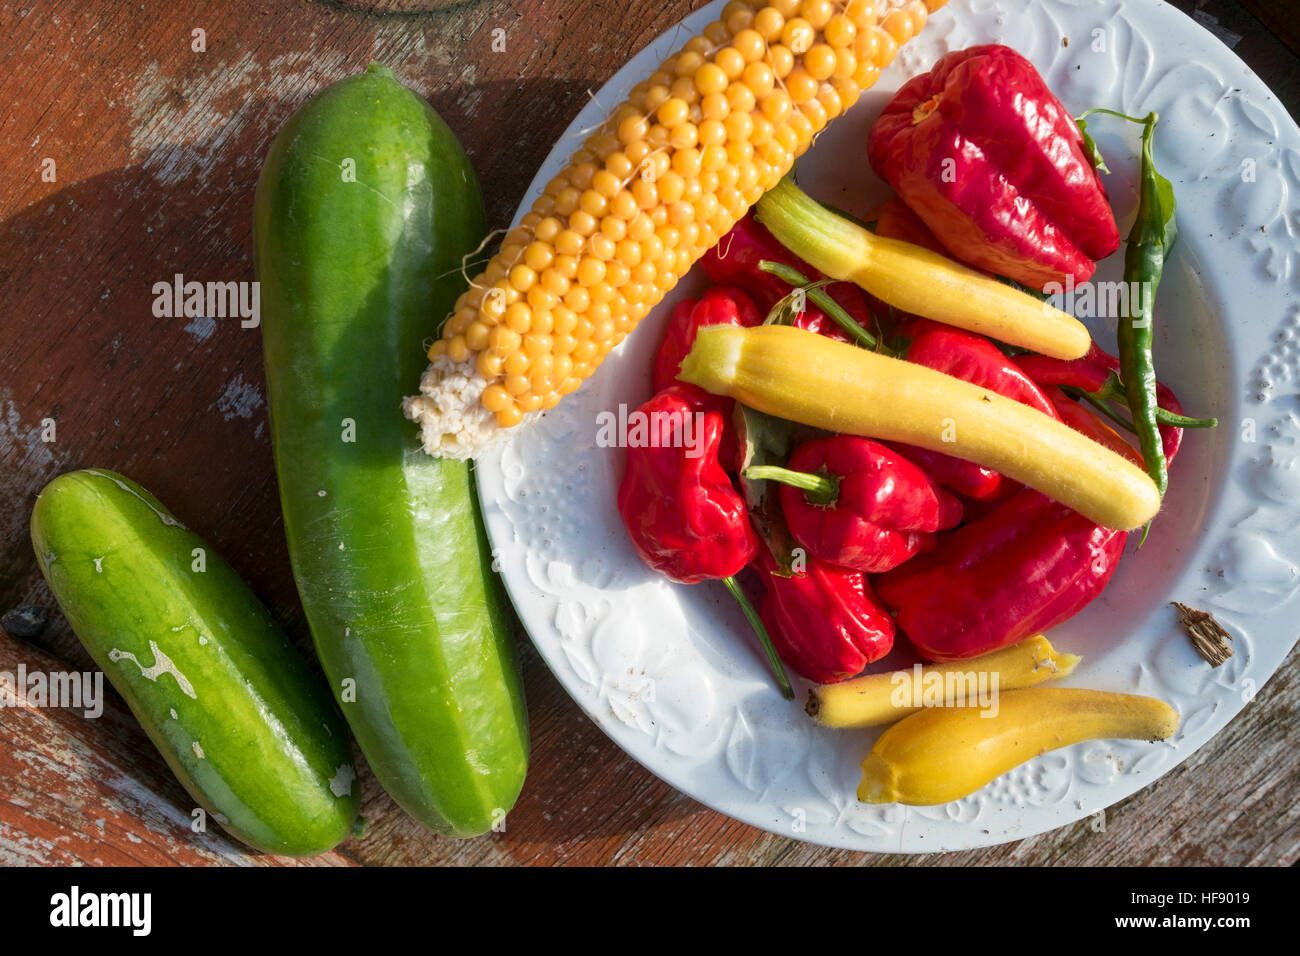 Fresh home grown vegetables (sweet corn, courgettes, red peppers, and small squashes) harvested and grown on an allotment garden UK Stock Photo